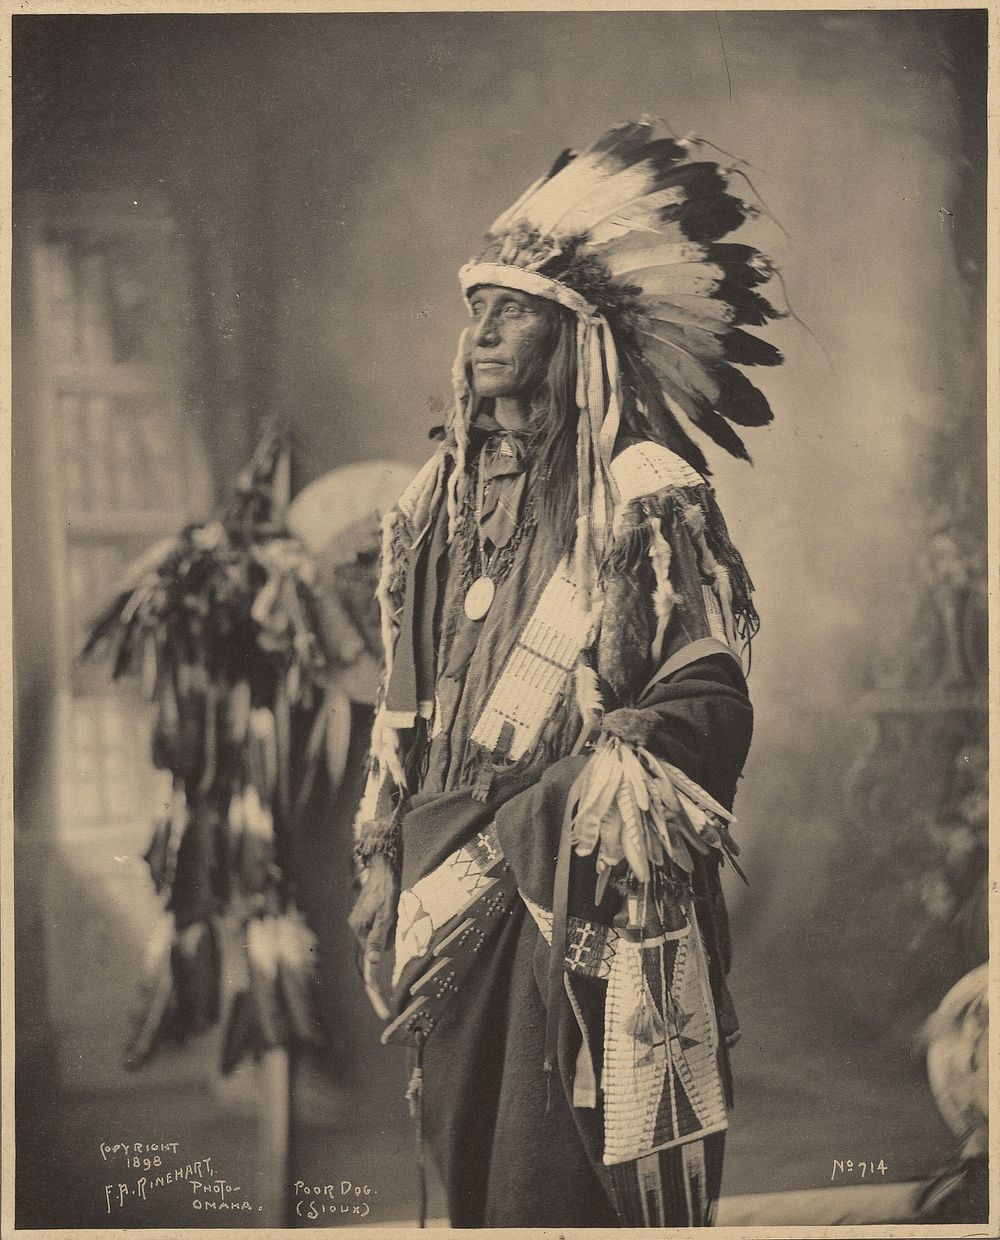 Poor Dog, Sioux by Adolph F Muhr and Frank A Rinehart